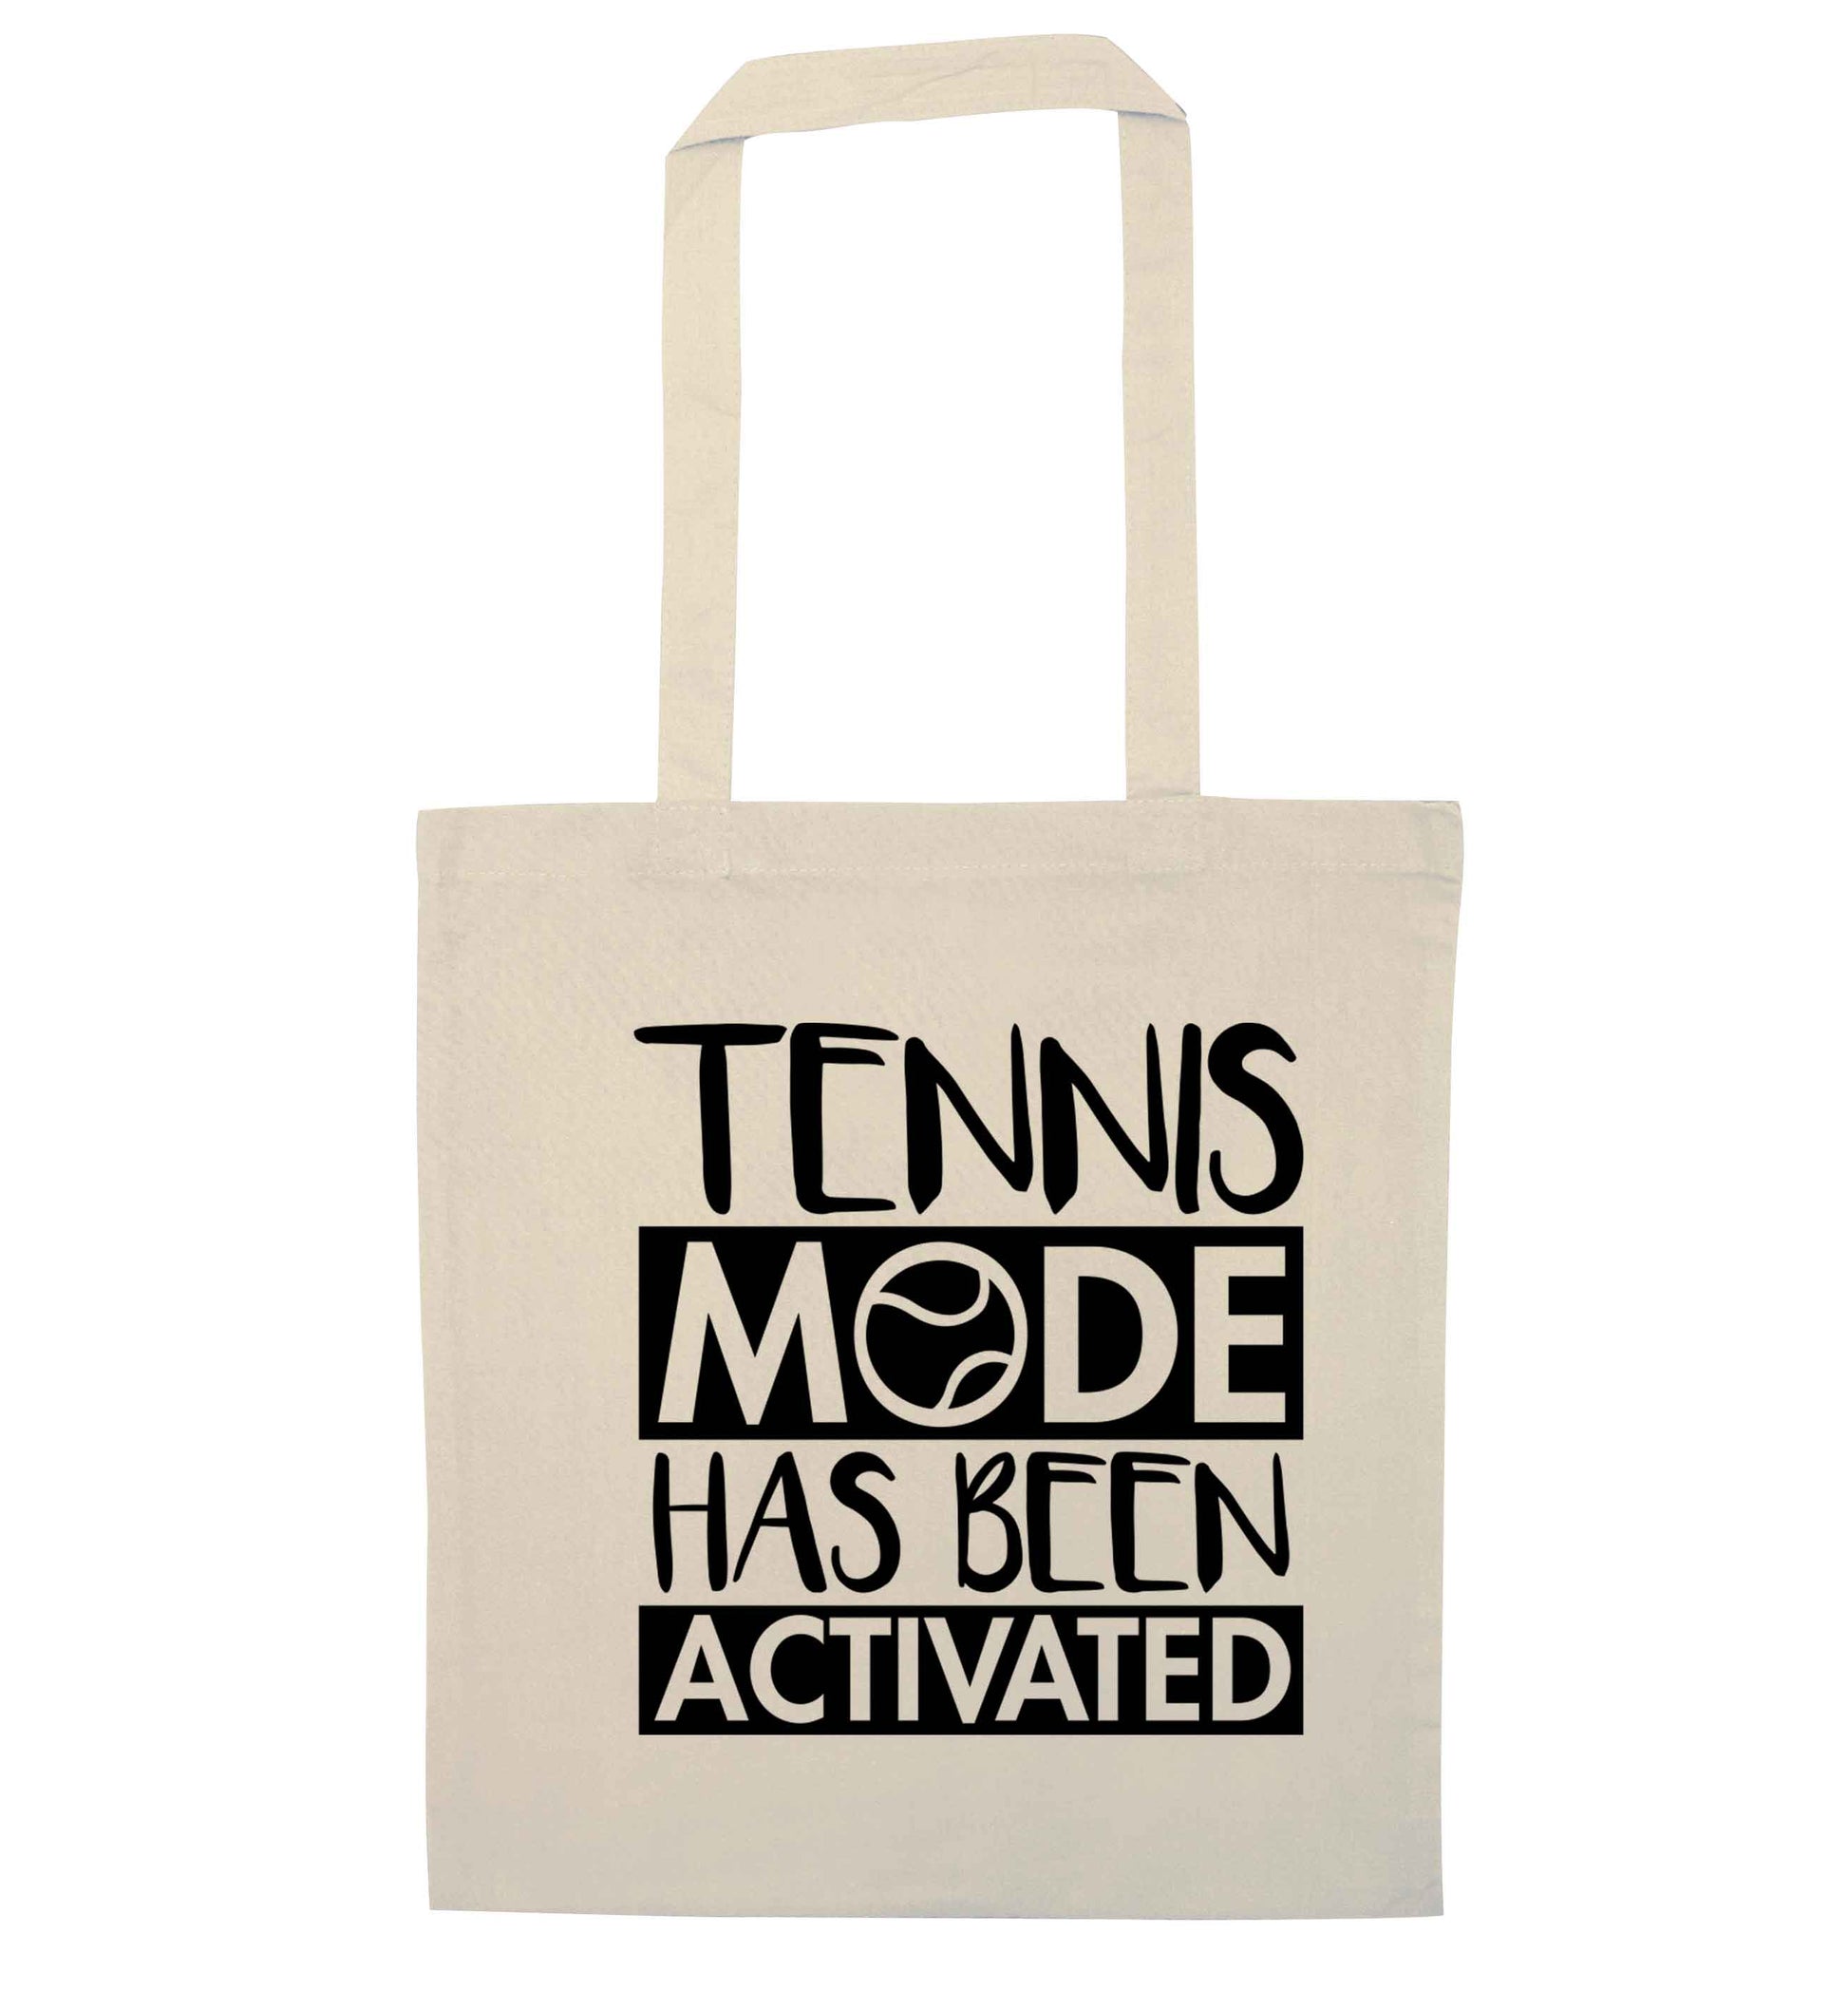 Tennis mode has been activated natural tote bag